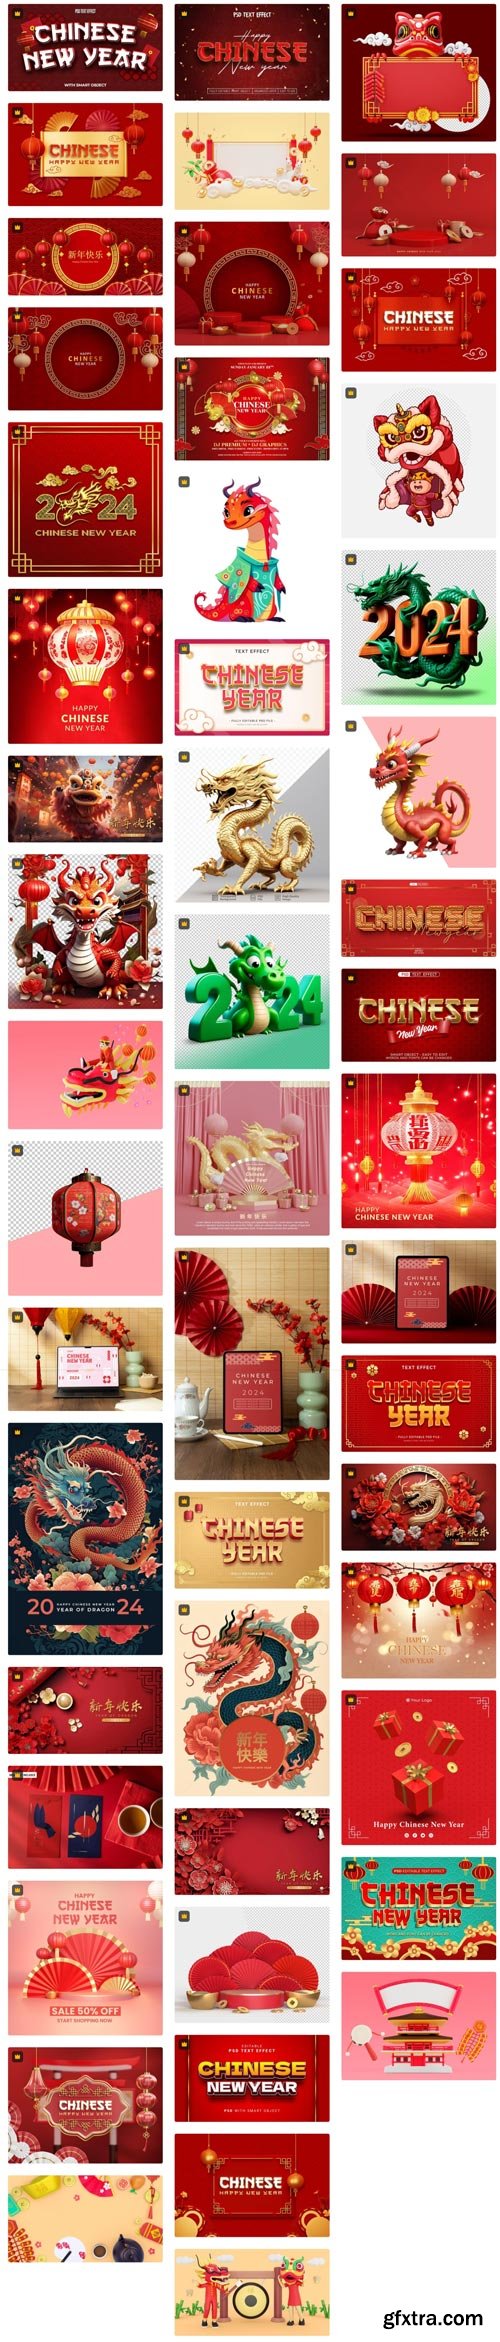 Premium PSD Collections - Chinese New Year PSD - 80xPSD